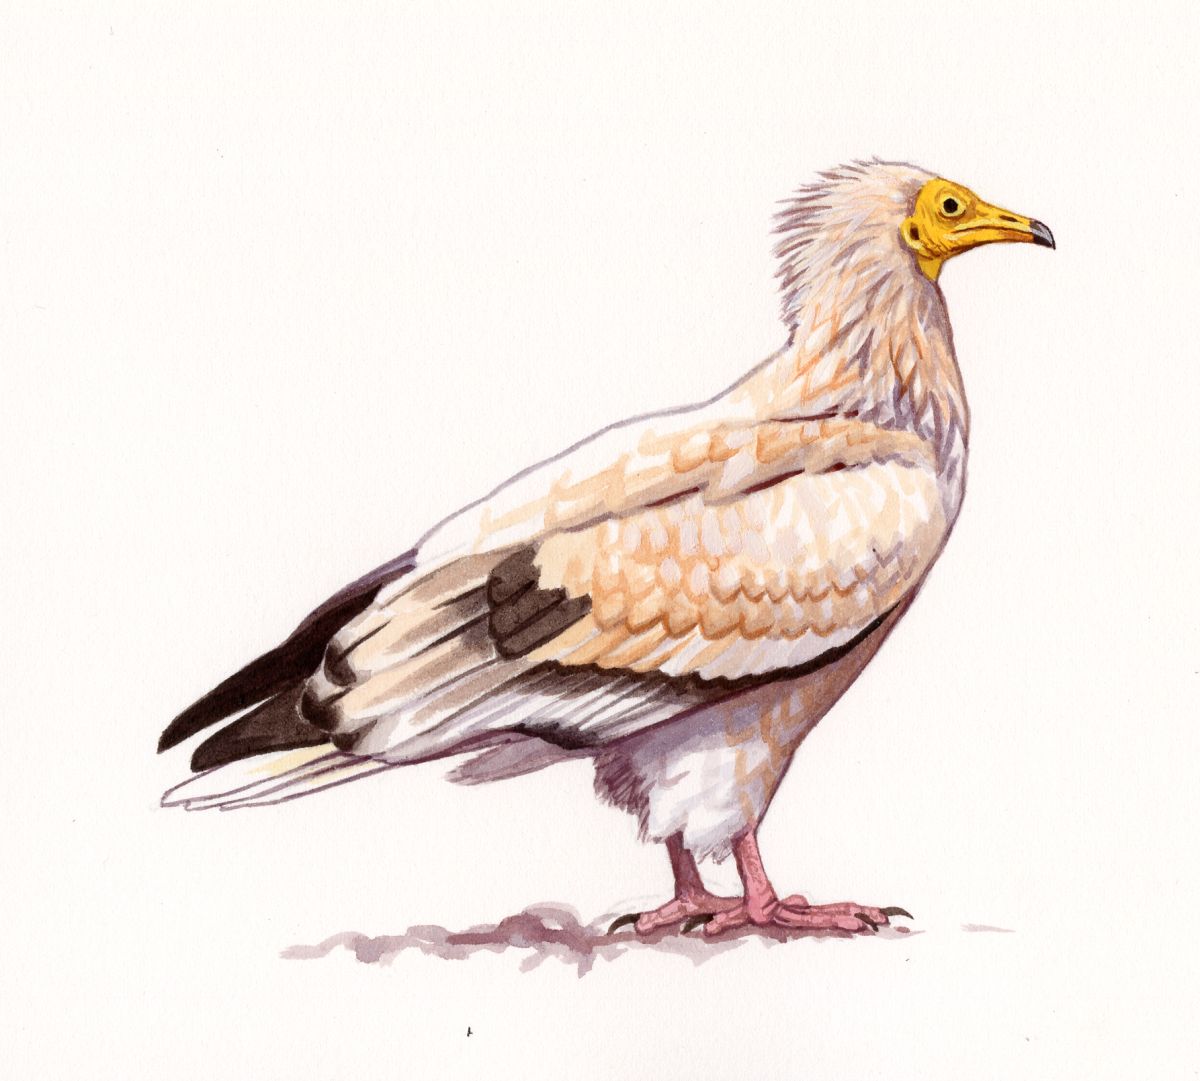 Egyptian Vulture (Neophron percnopterus), watercolour and bodycolour on paper